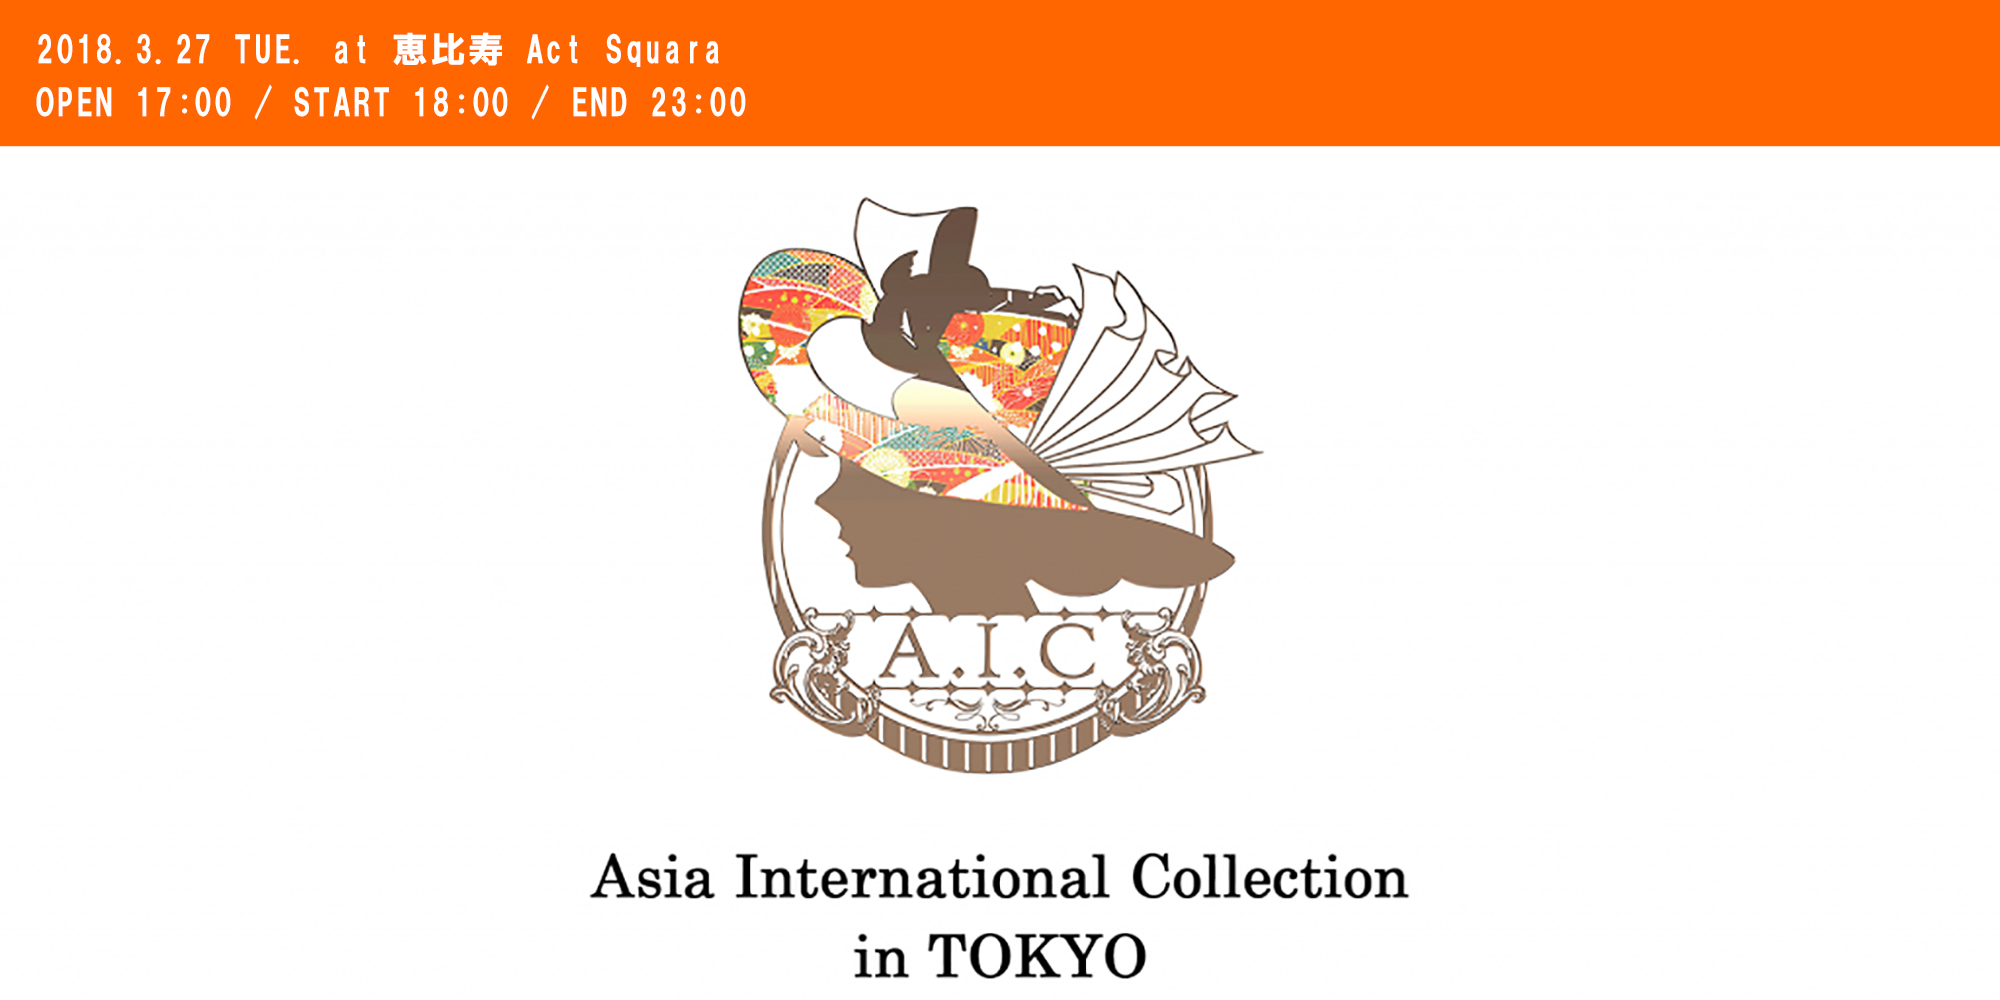 Asia International Collection in TOKYO